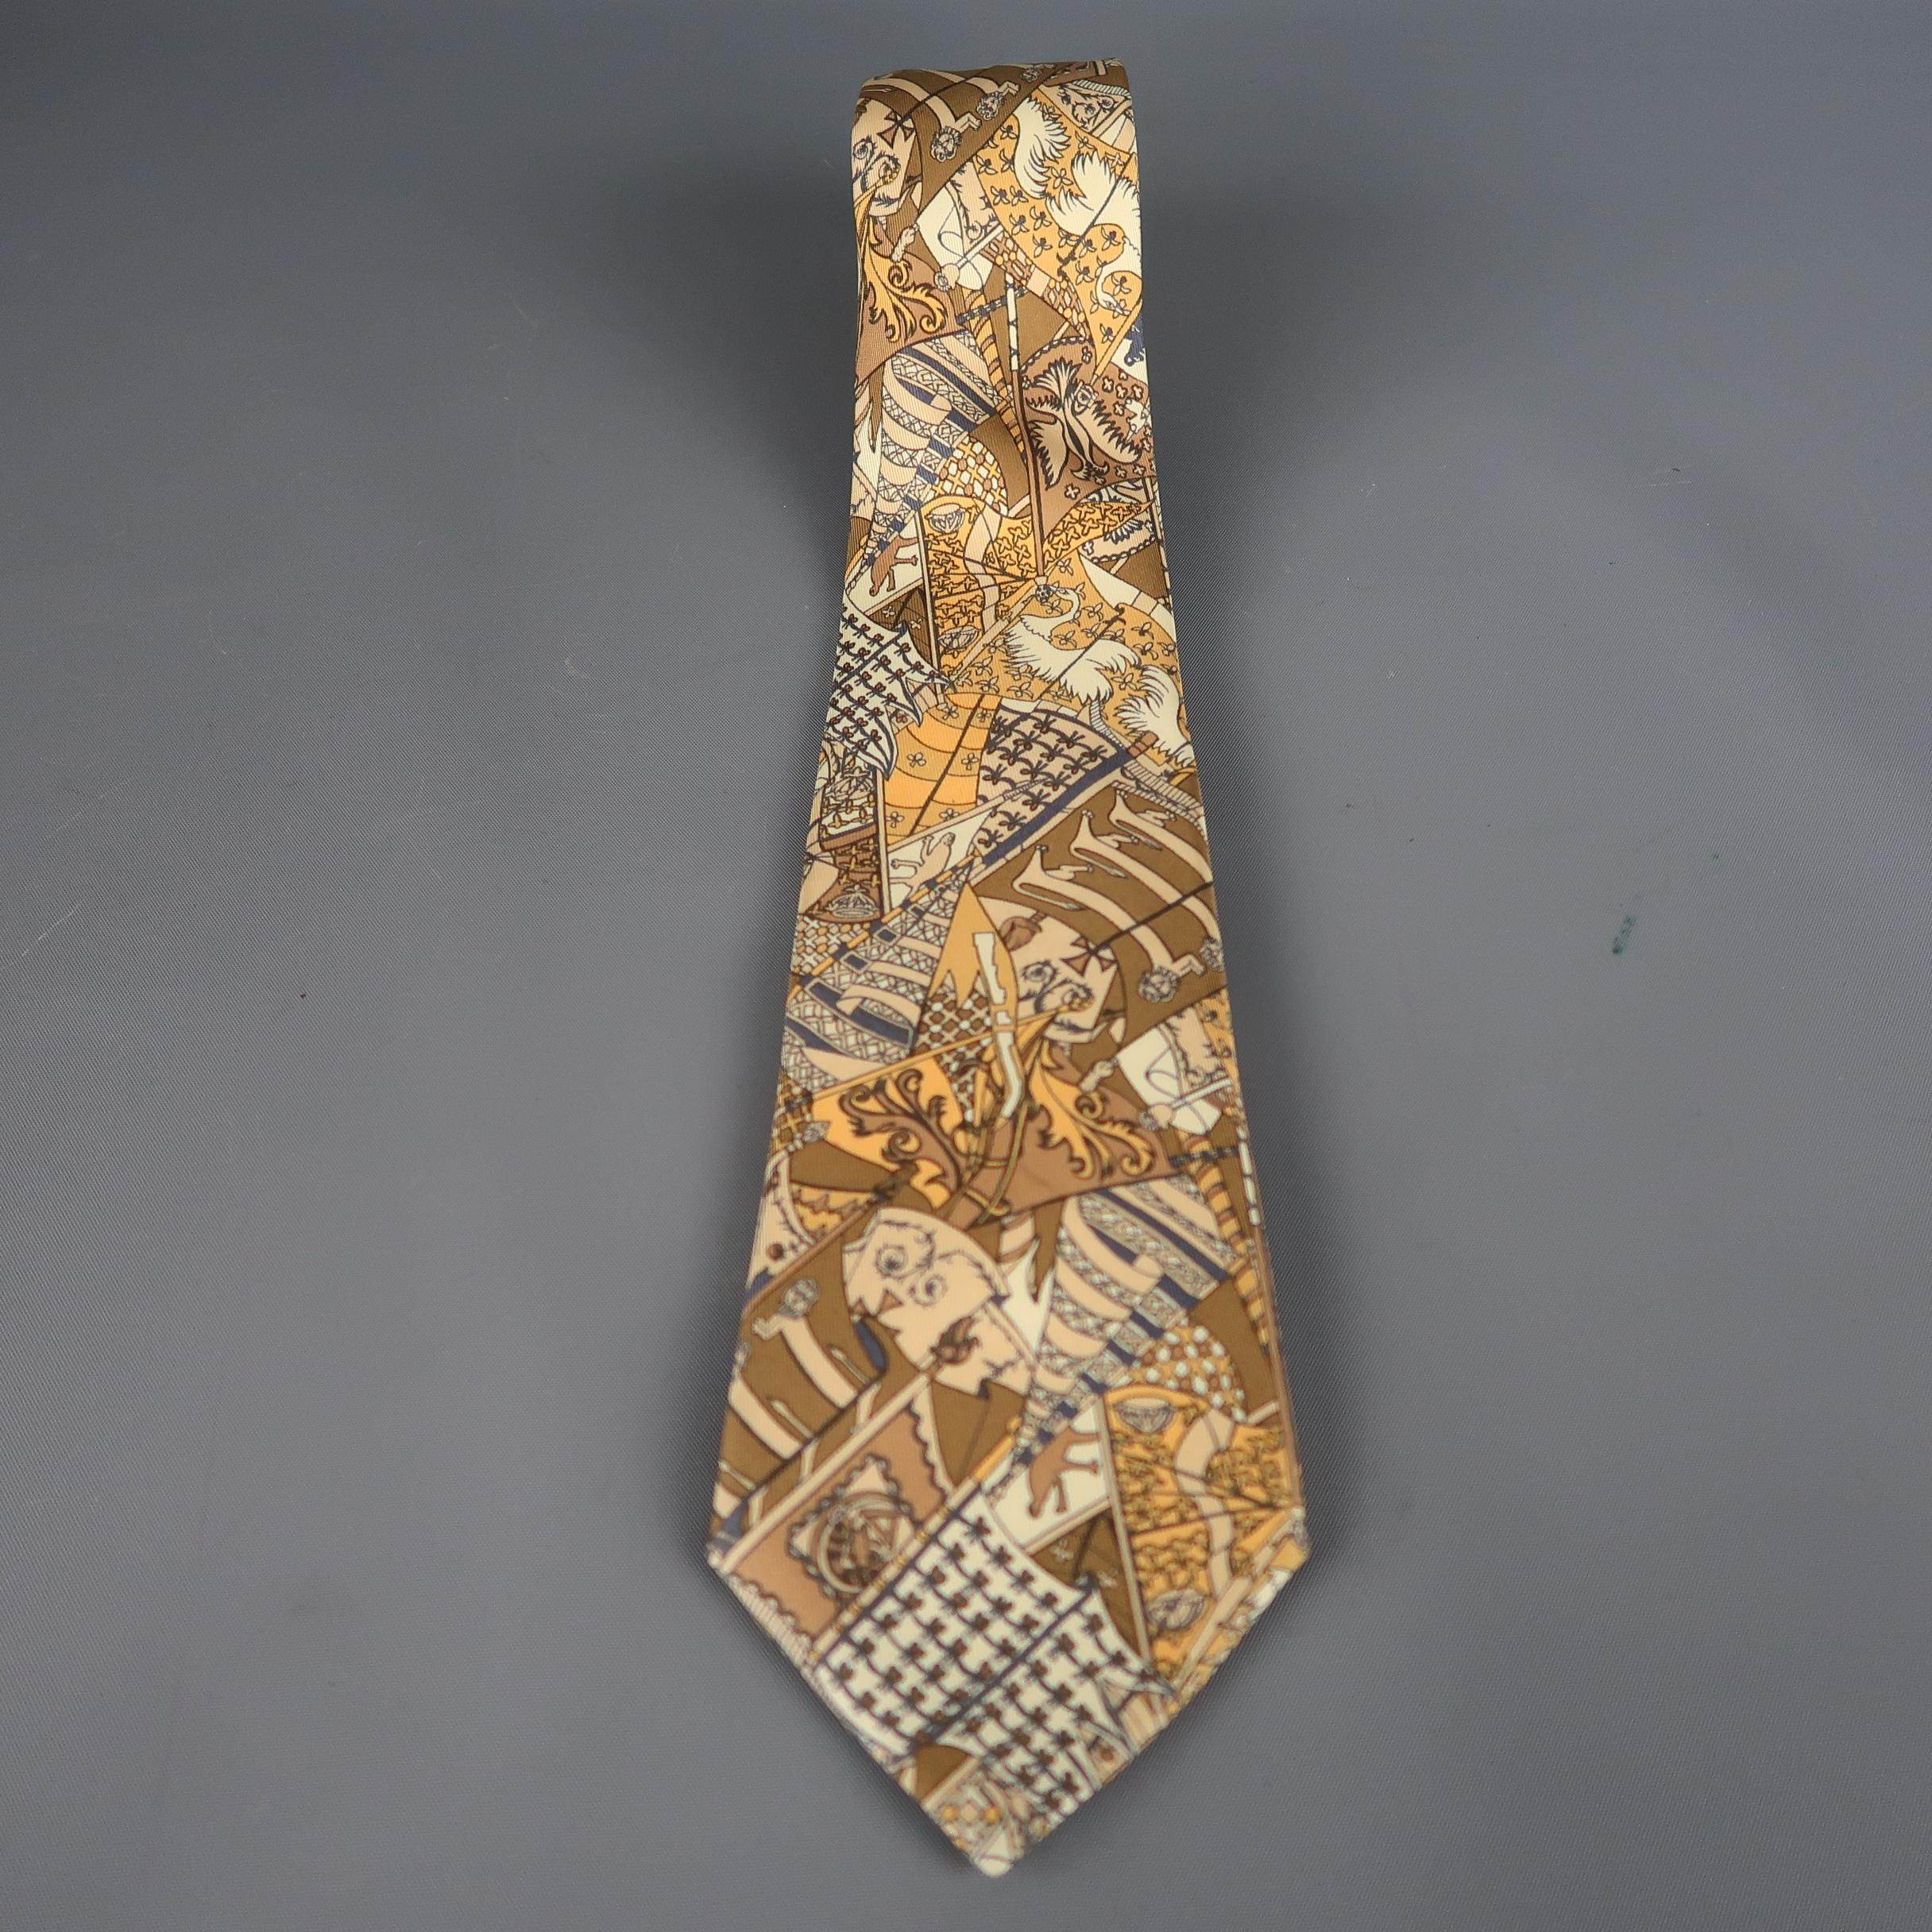 HERMES tie come in gold silk  with an all over XV century print. Made in France.
 
Excellent Pre-Owned Condition.
 
Width: 3.5 in.